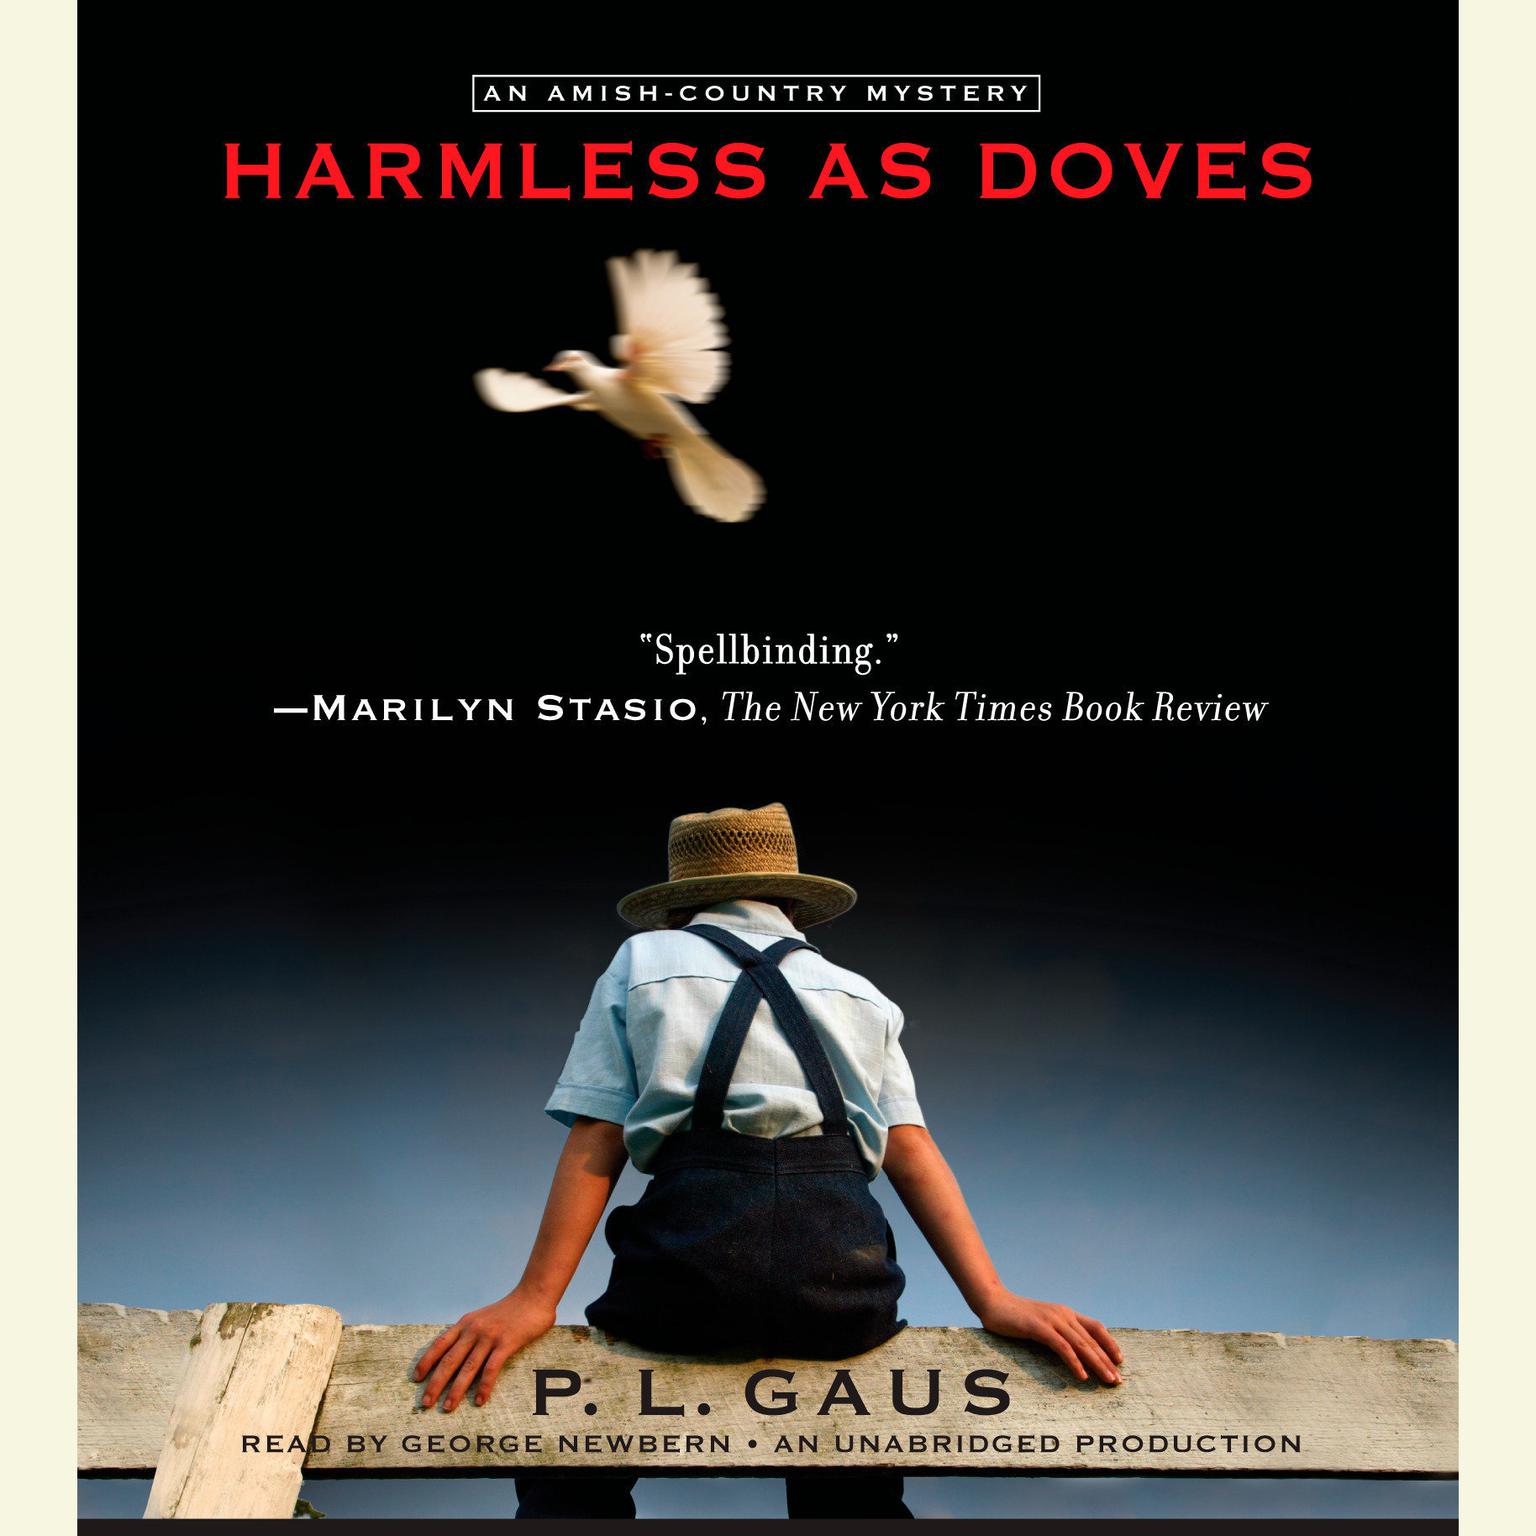 Harmless as Doves: An Amish-Country Mystery (#7) Audiobook, by P. L. Gaus